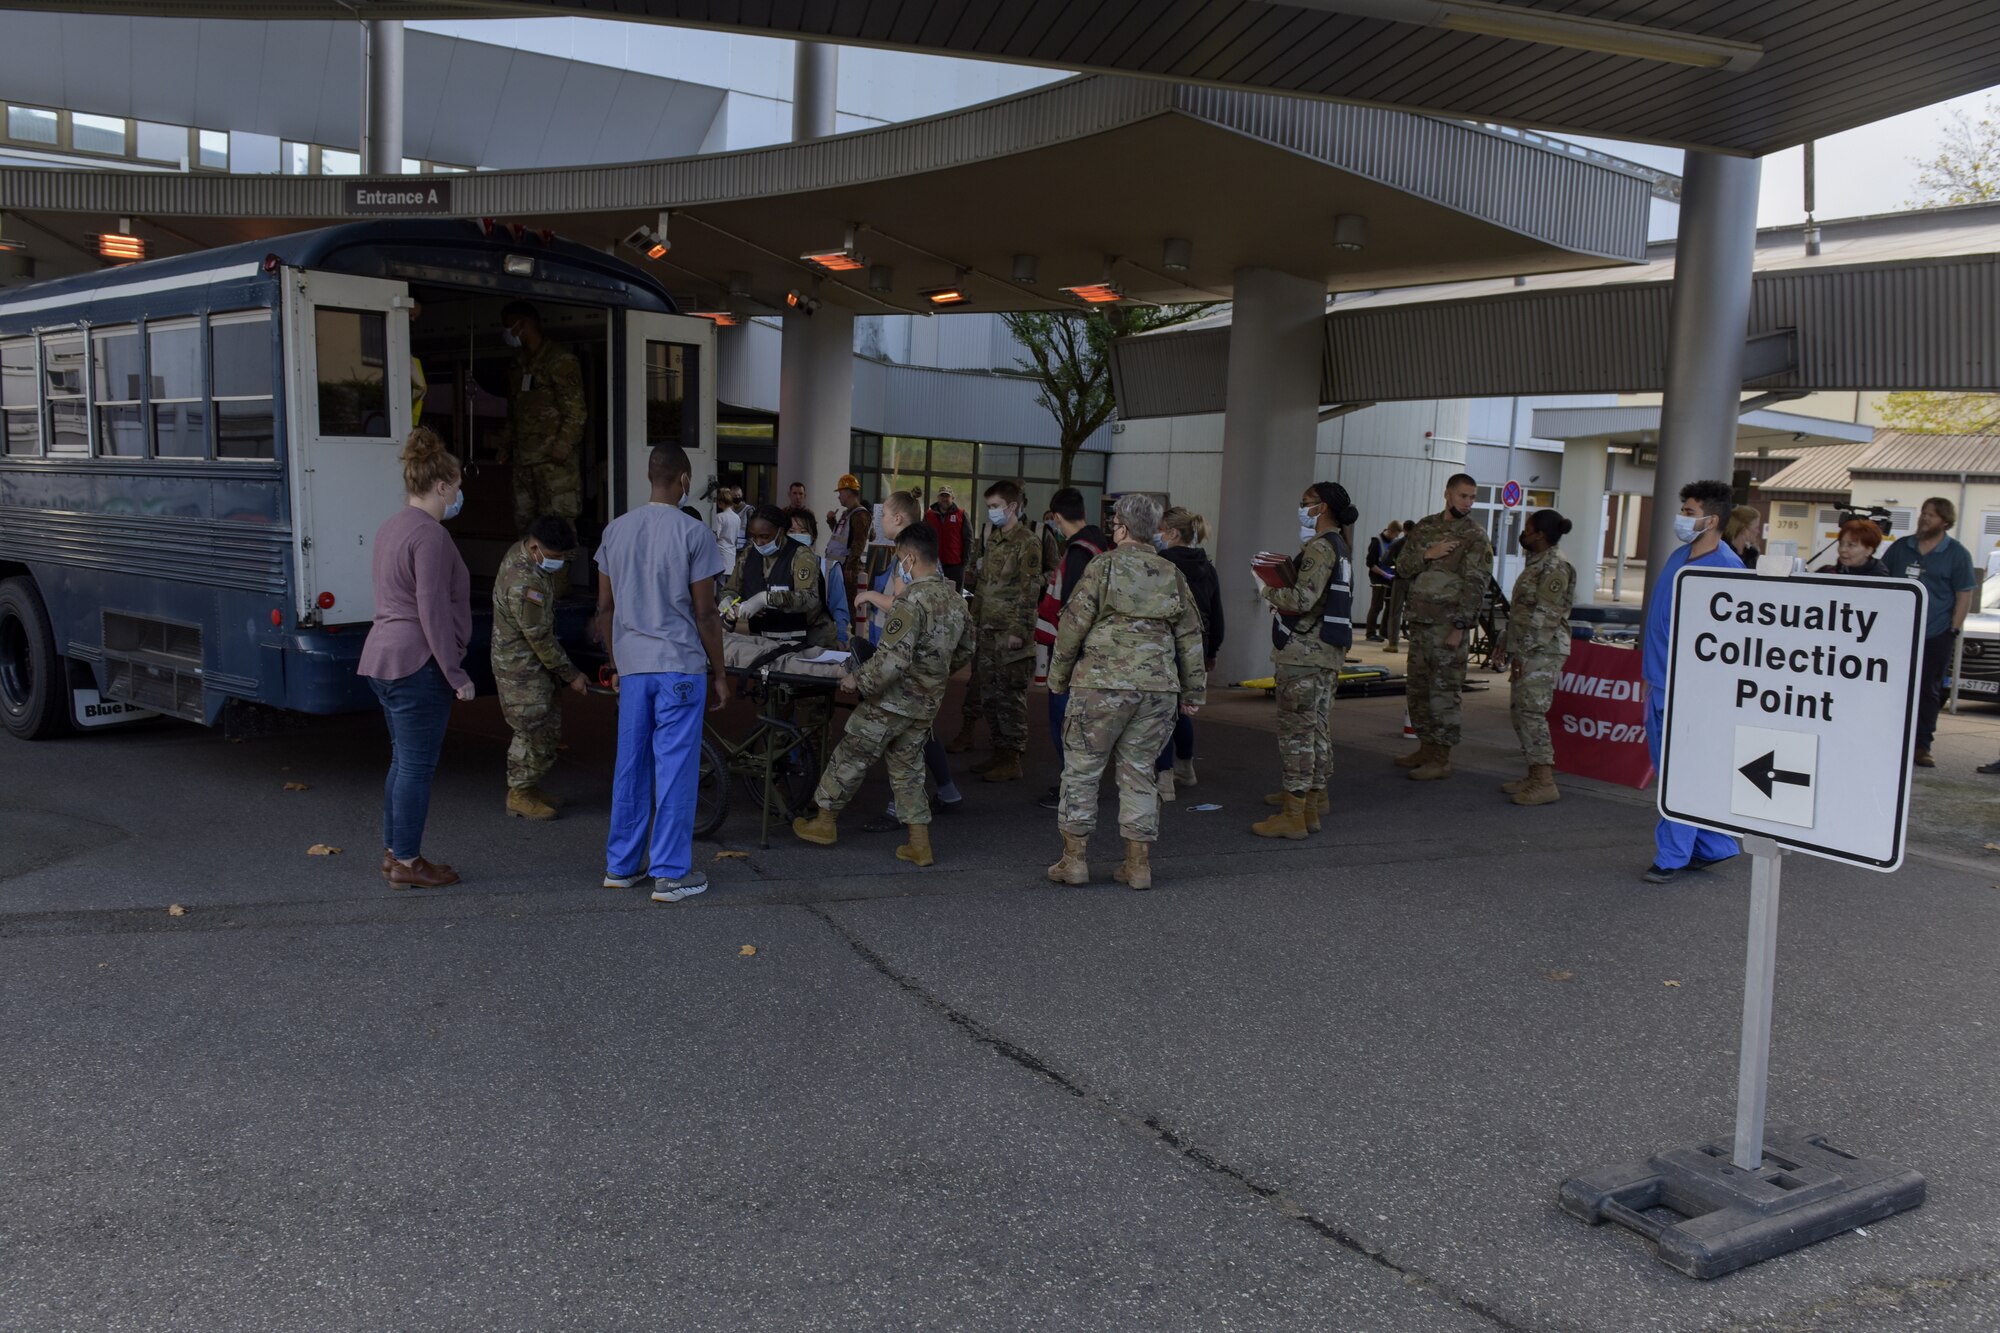 Many people in a military uniform help a patient, being played by an actor, out of an ambulatory bus on a litter.